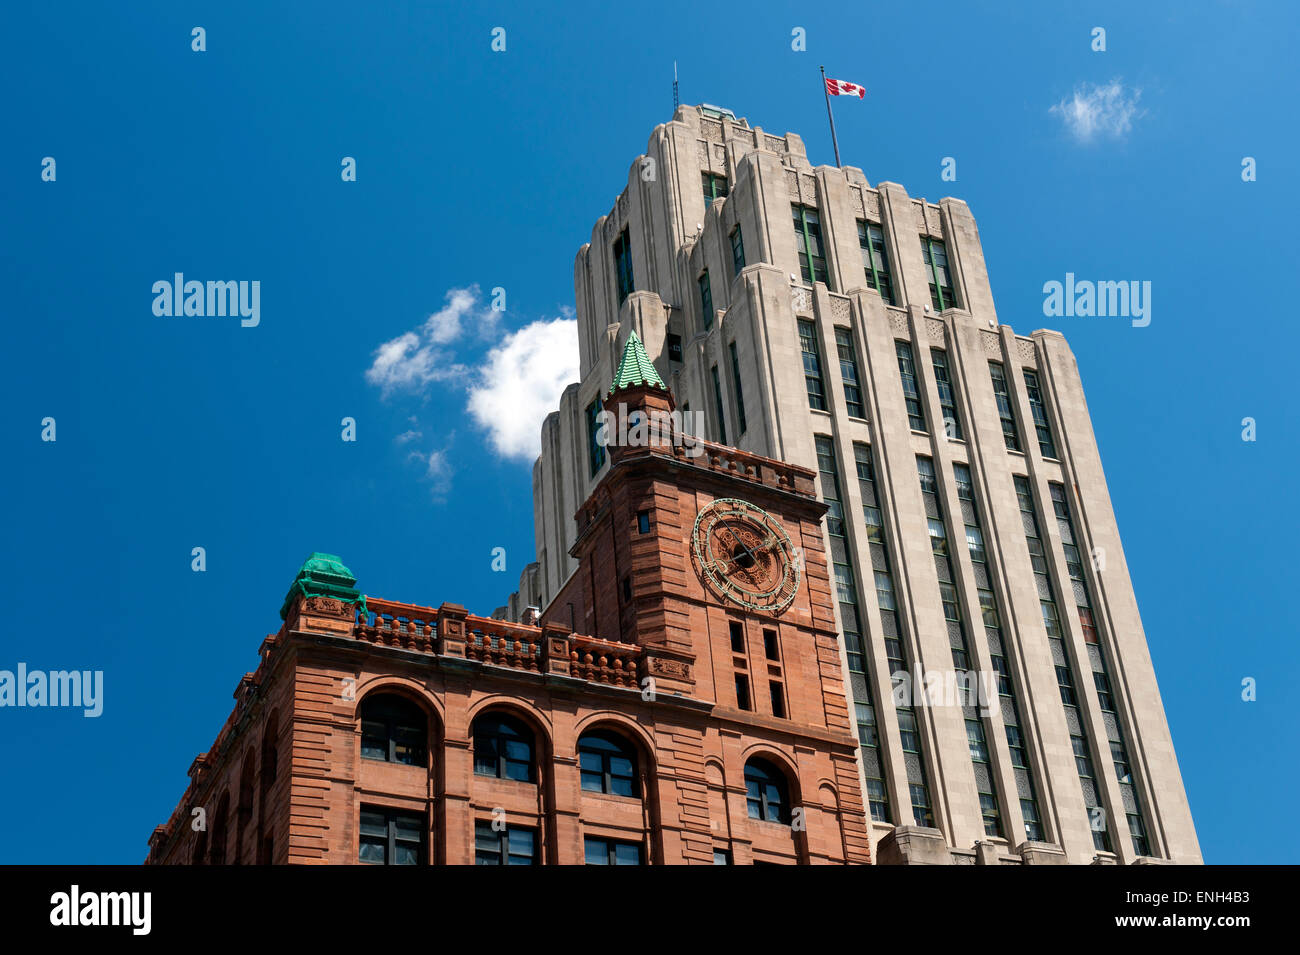 New York Life Insurance and Aldred buildings, Old Montreal, province of Quebec, Canada. Stock Photo